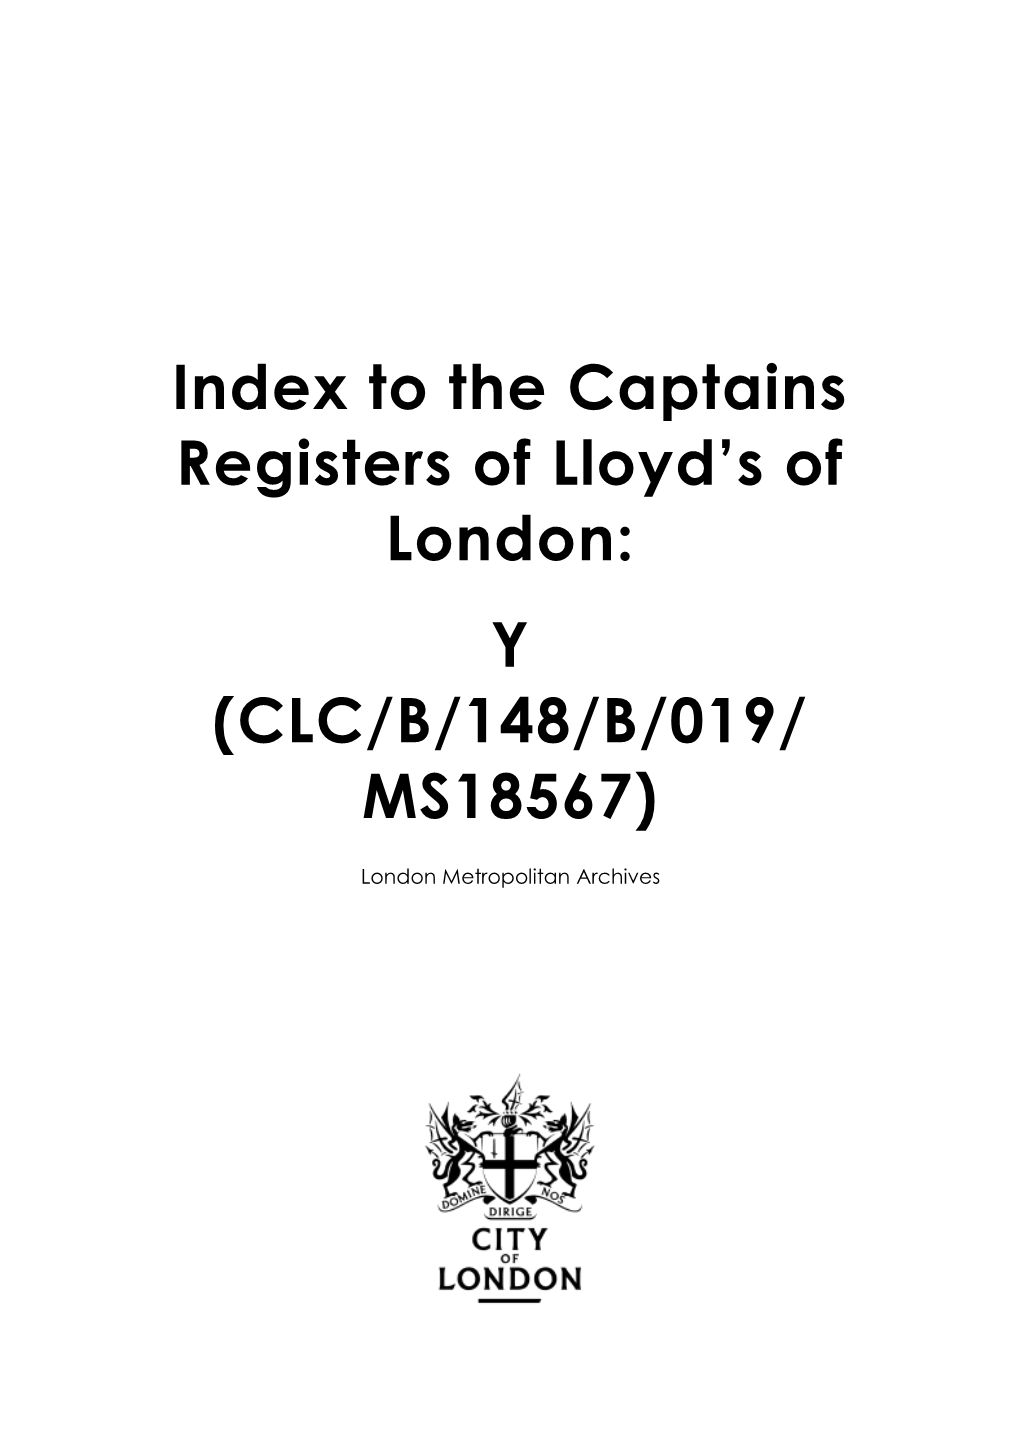 Index to the Captains Register of Lloyds of London